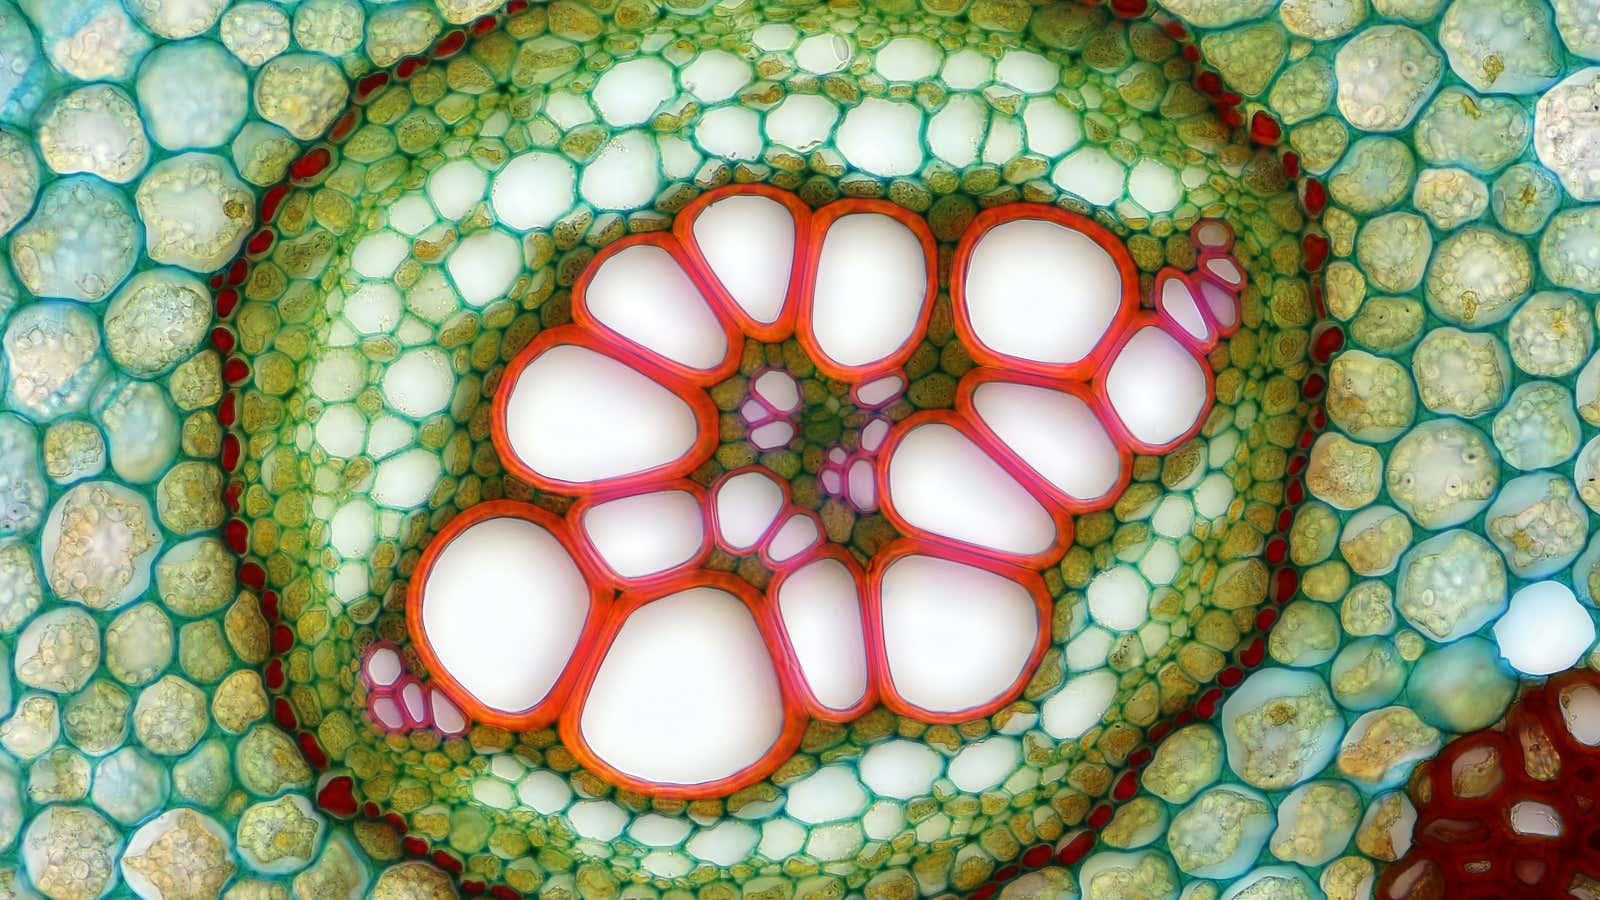 Transverse section of an ostrich fern, magnified 250x.